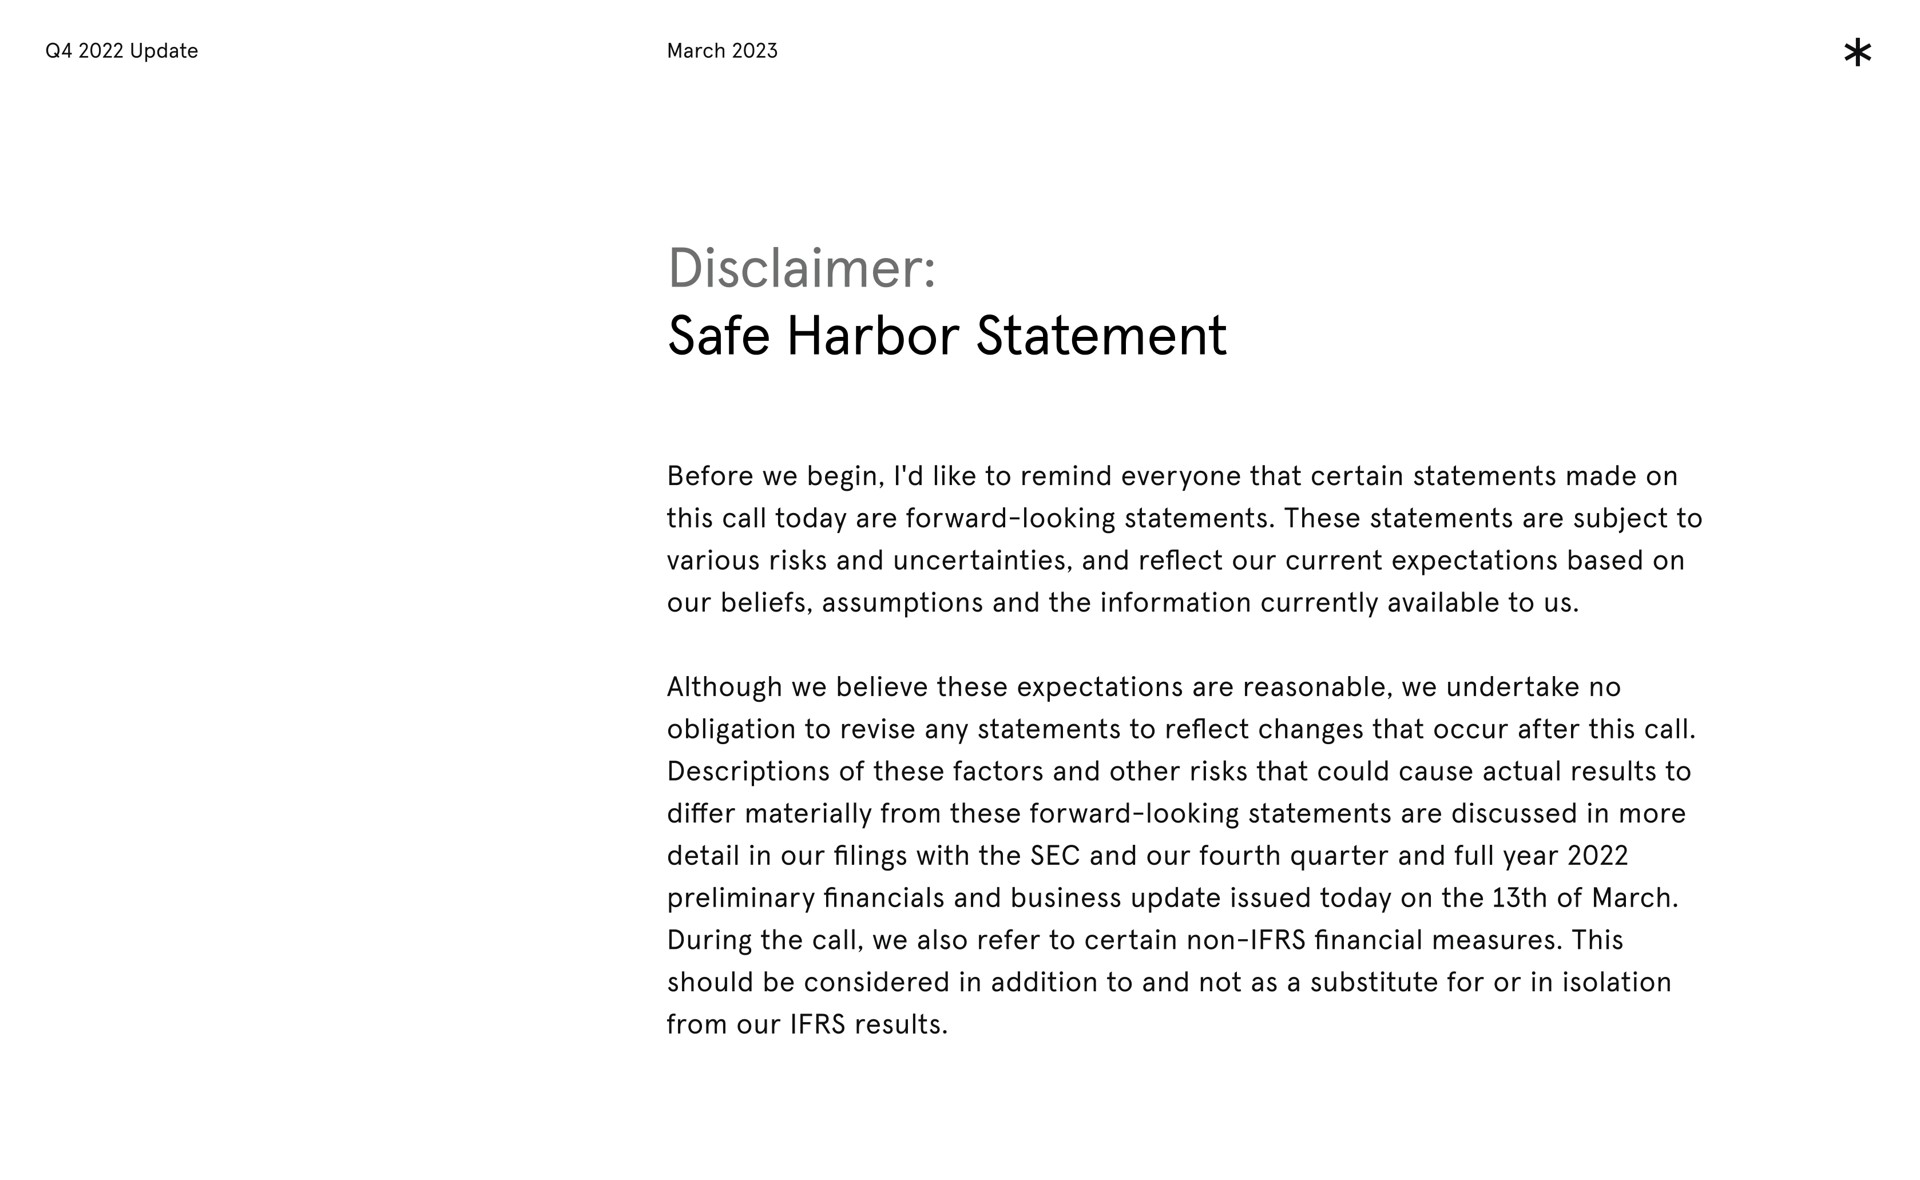 safe harbor statement before i to remind that certain statements made on this call are these statements are subject to various and uncertainties and refect our current based on our beliefs and the information available to ush believe these are reasonable no to revise ana statements to refect that occur after this of these factors and other that could cause actual results to from these statements are discussed in more detail in our the and our fourth and full and business issued on the of the call also refer to certain this should be considered in addition to and not as a substitute for or in isolation from our results disclaimer we begin like everyone today forward looking risks reflect expectations assumptions currently us although we expectations we undertake obligation any reflect changes descriptions risks differ materially forward looking filings with sec quarter year preliminary update today march during we non financial measures | Arrival